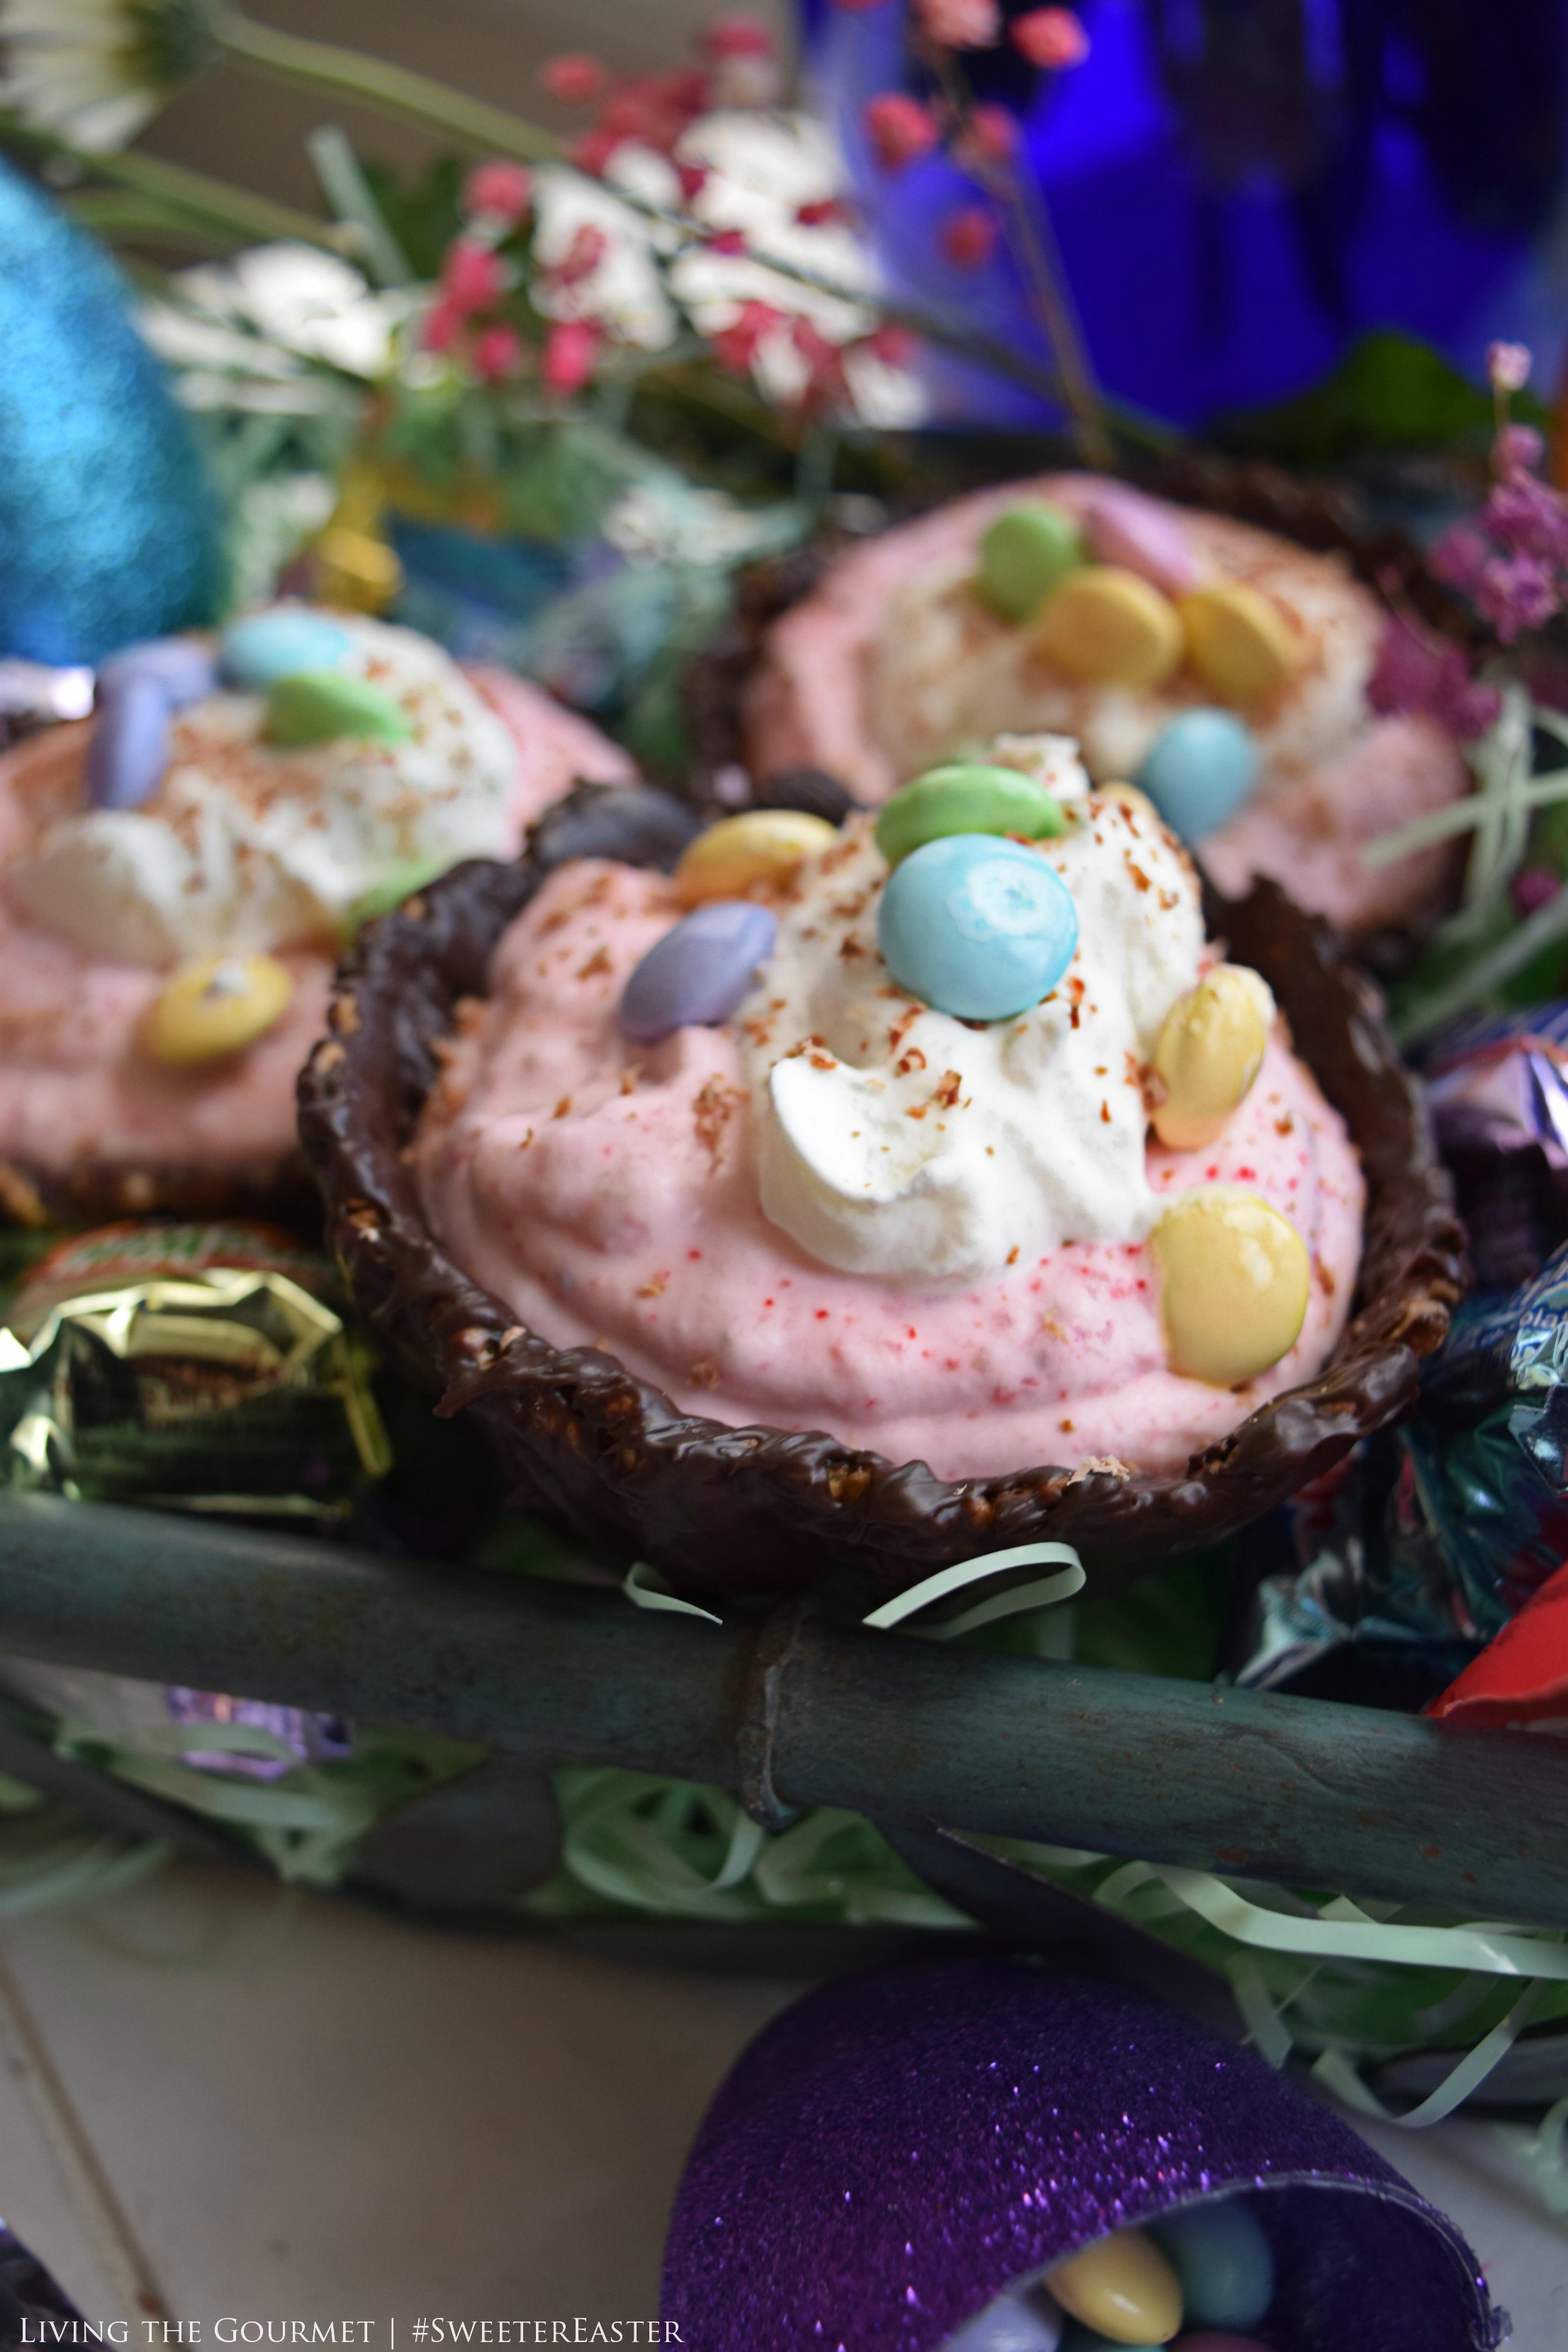 Living the Gourmet: Chocolate Easter Eggs with Strawberry Mousse | #SweeterEaster #Ad